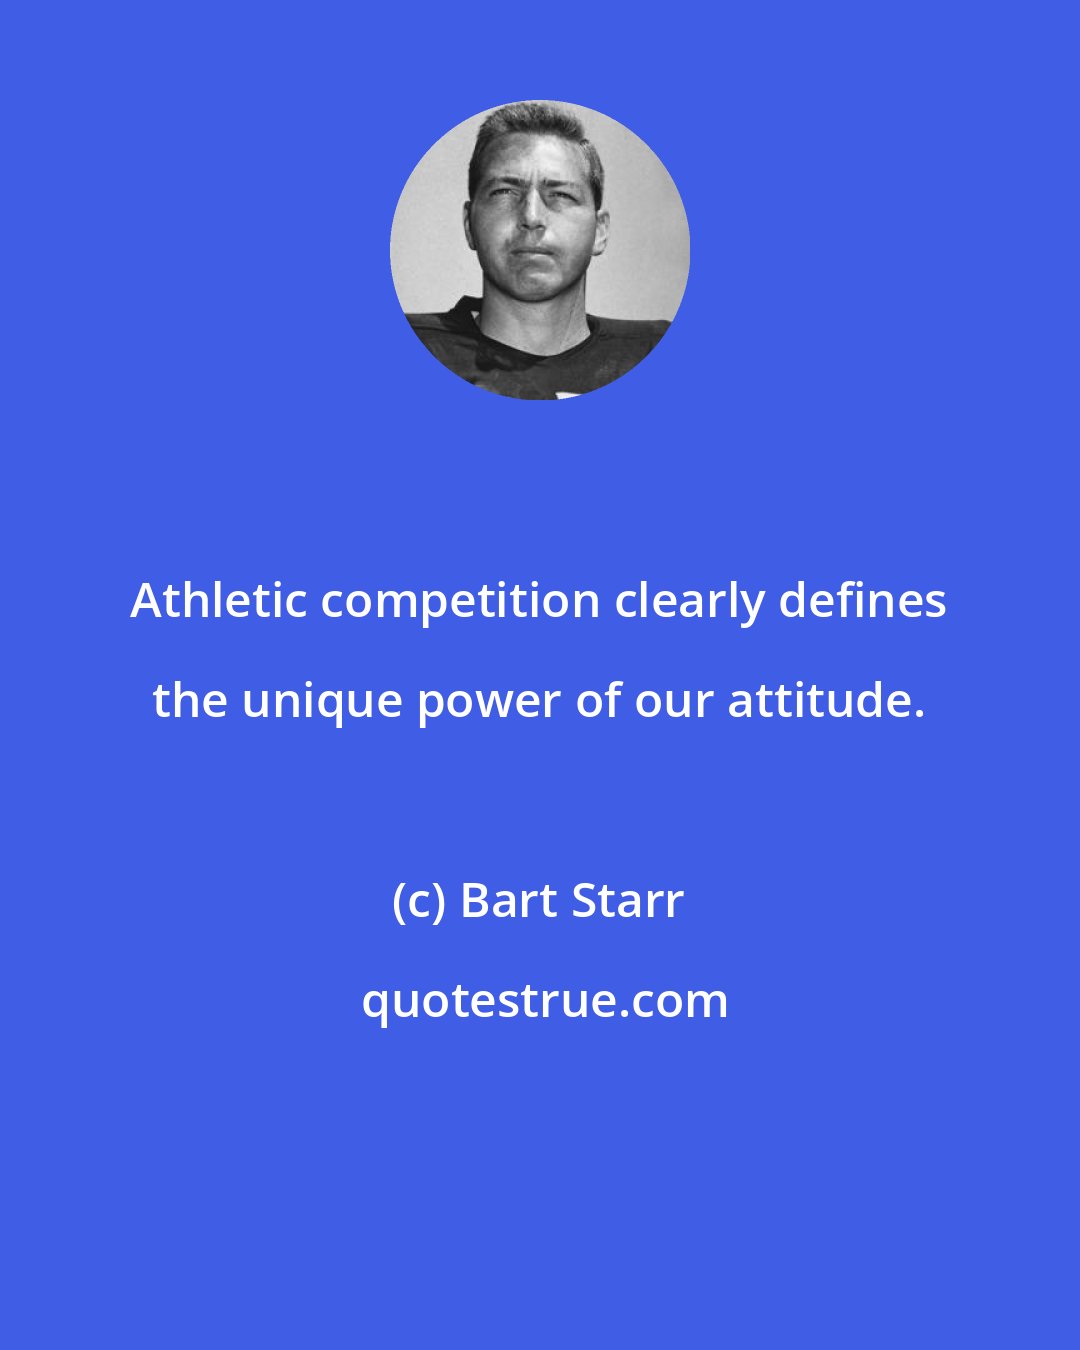 Bart Starr: Athletic competition clearly defines the unique power of our attitude.